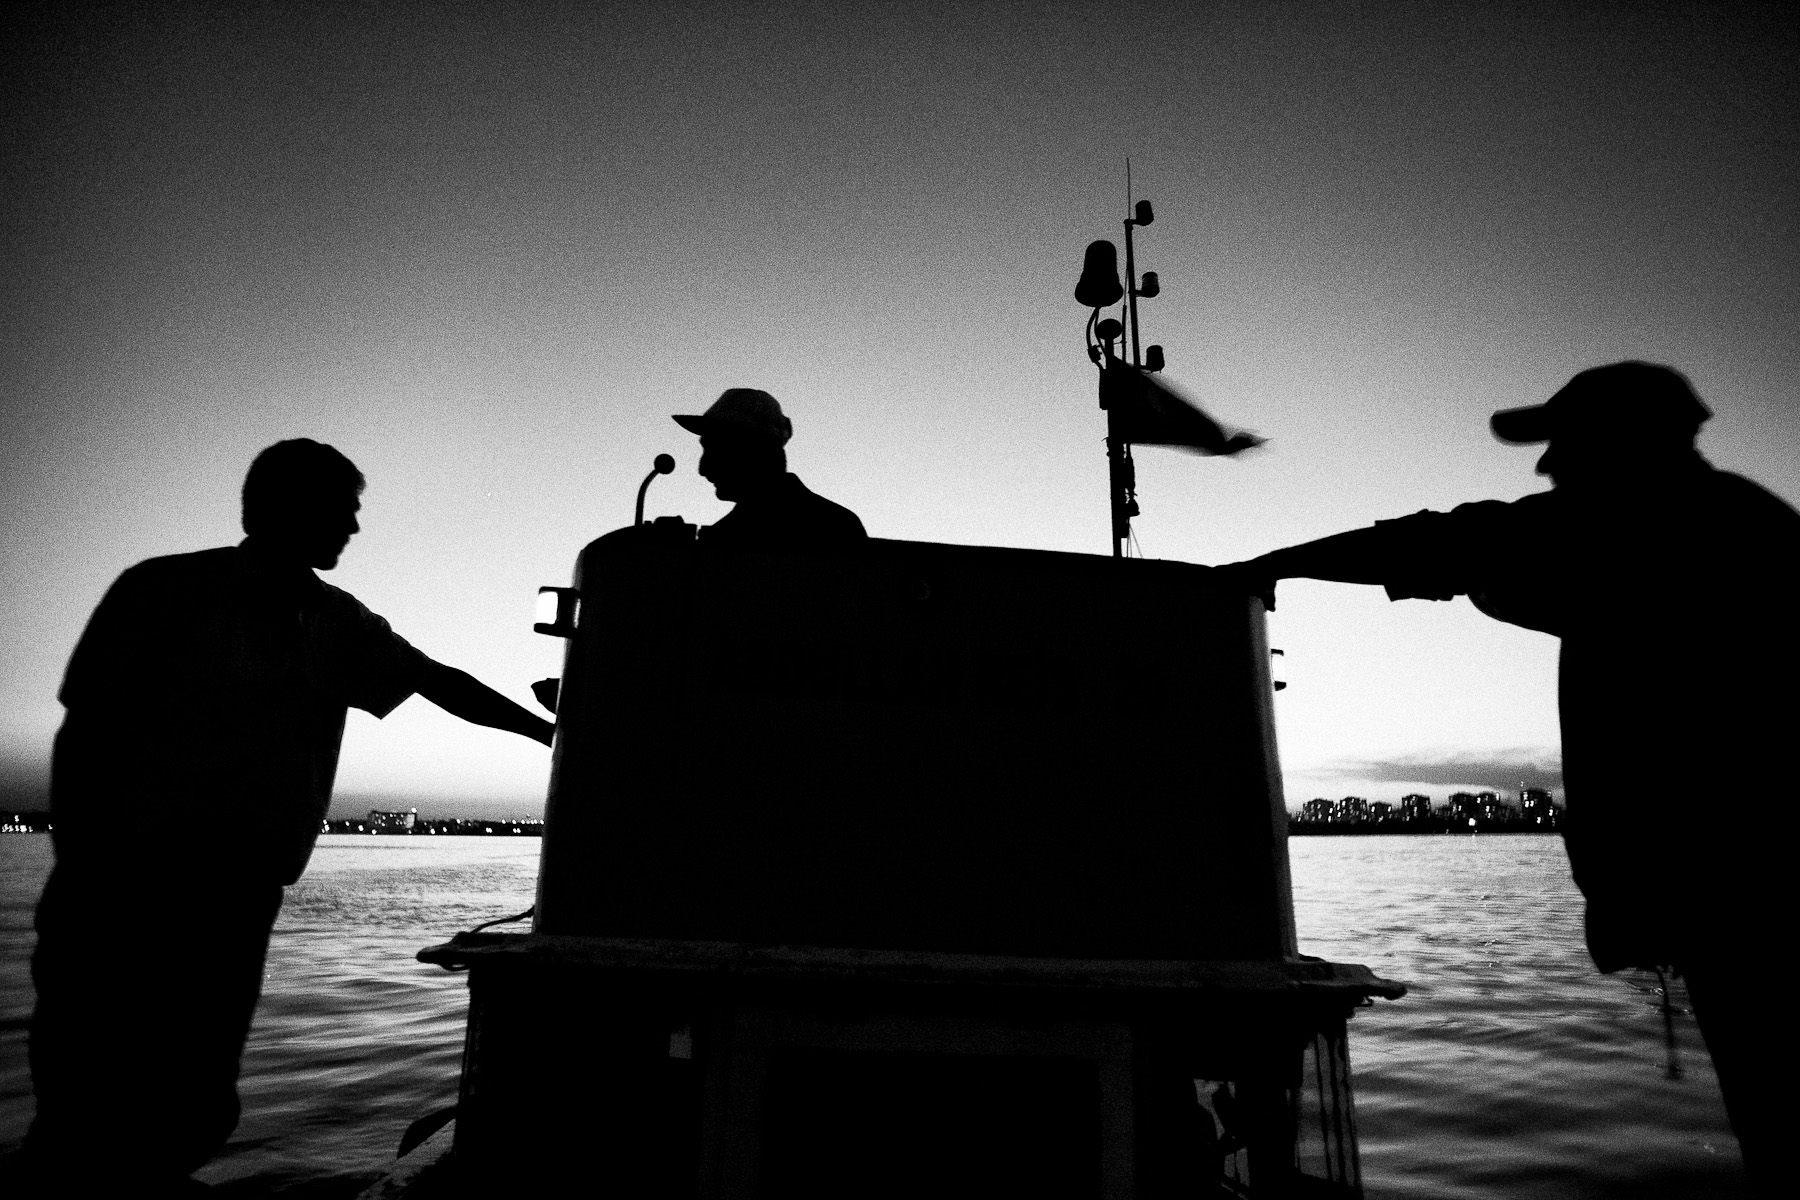 Waiting for the night to fall completely and the fish to come in, Cevat, Adem and Cinar, discuss the tactics. A lot of work over night is coordinated with their friend's boat that only has two fishermen on board.